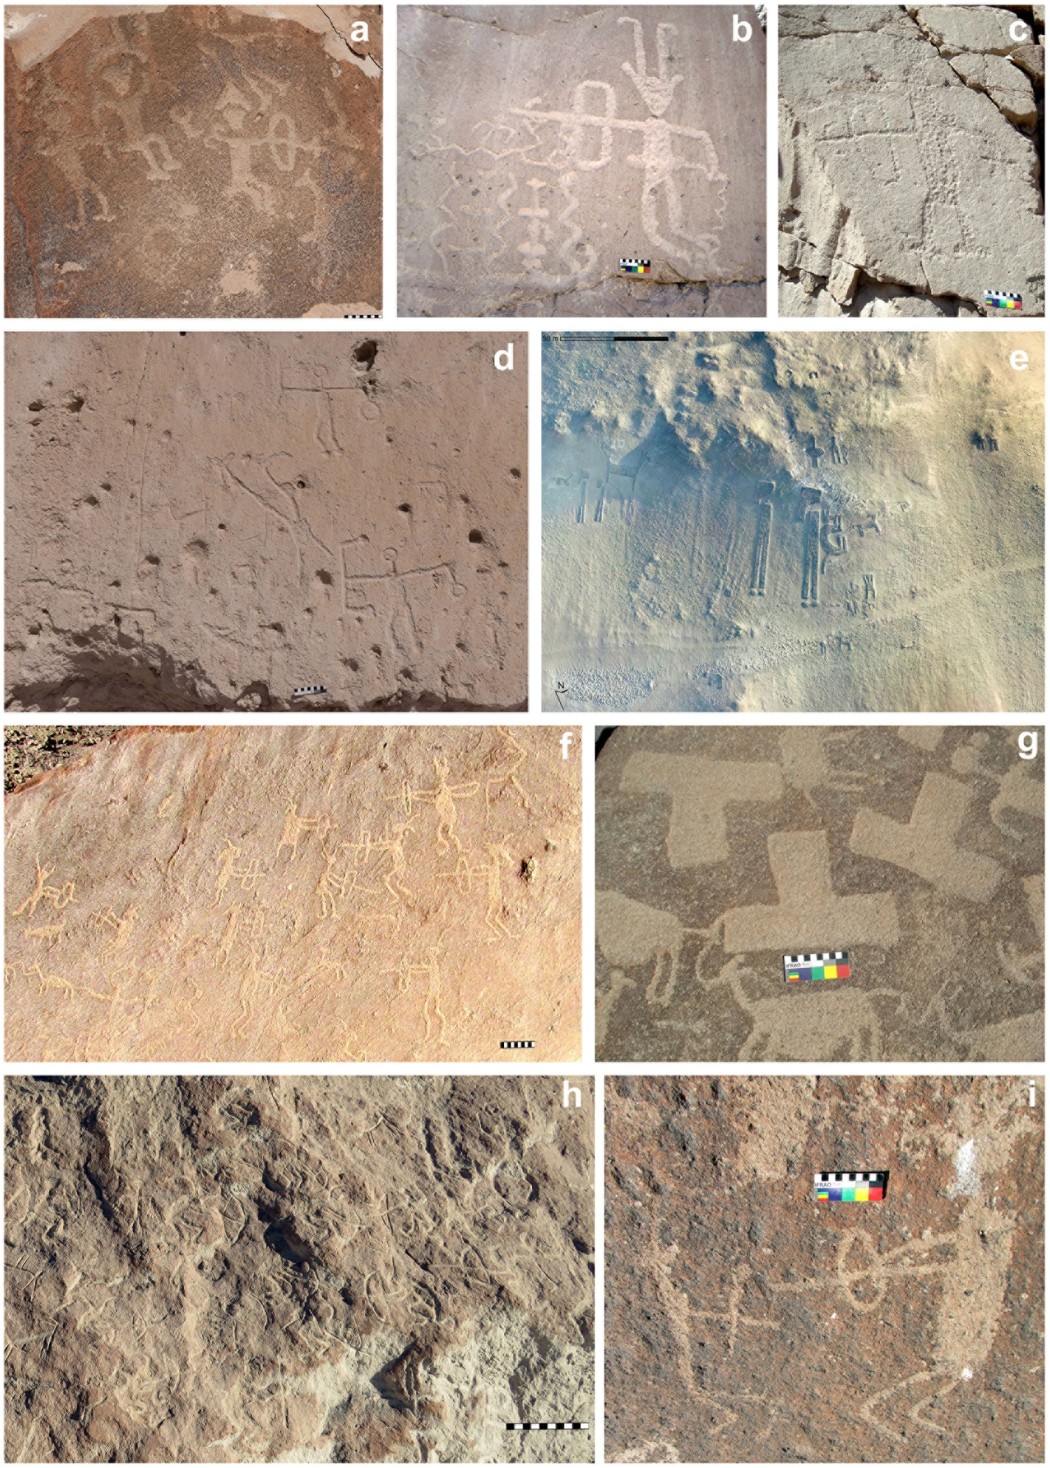 violence societies Atacama Desert Motifs in rock art and geoglyphs from the Formative Period (a-c) and Late Intermediate Period (d-j). Photograph (a) and (d) by Nick Charlesworth; (e) photogrammetry by Marta Crespo.